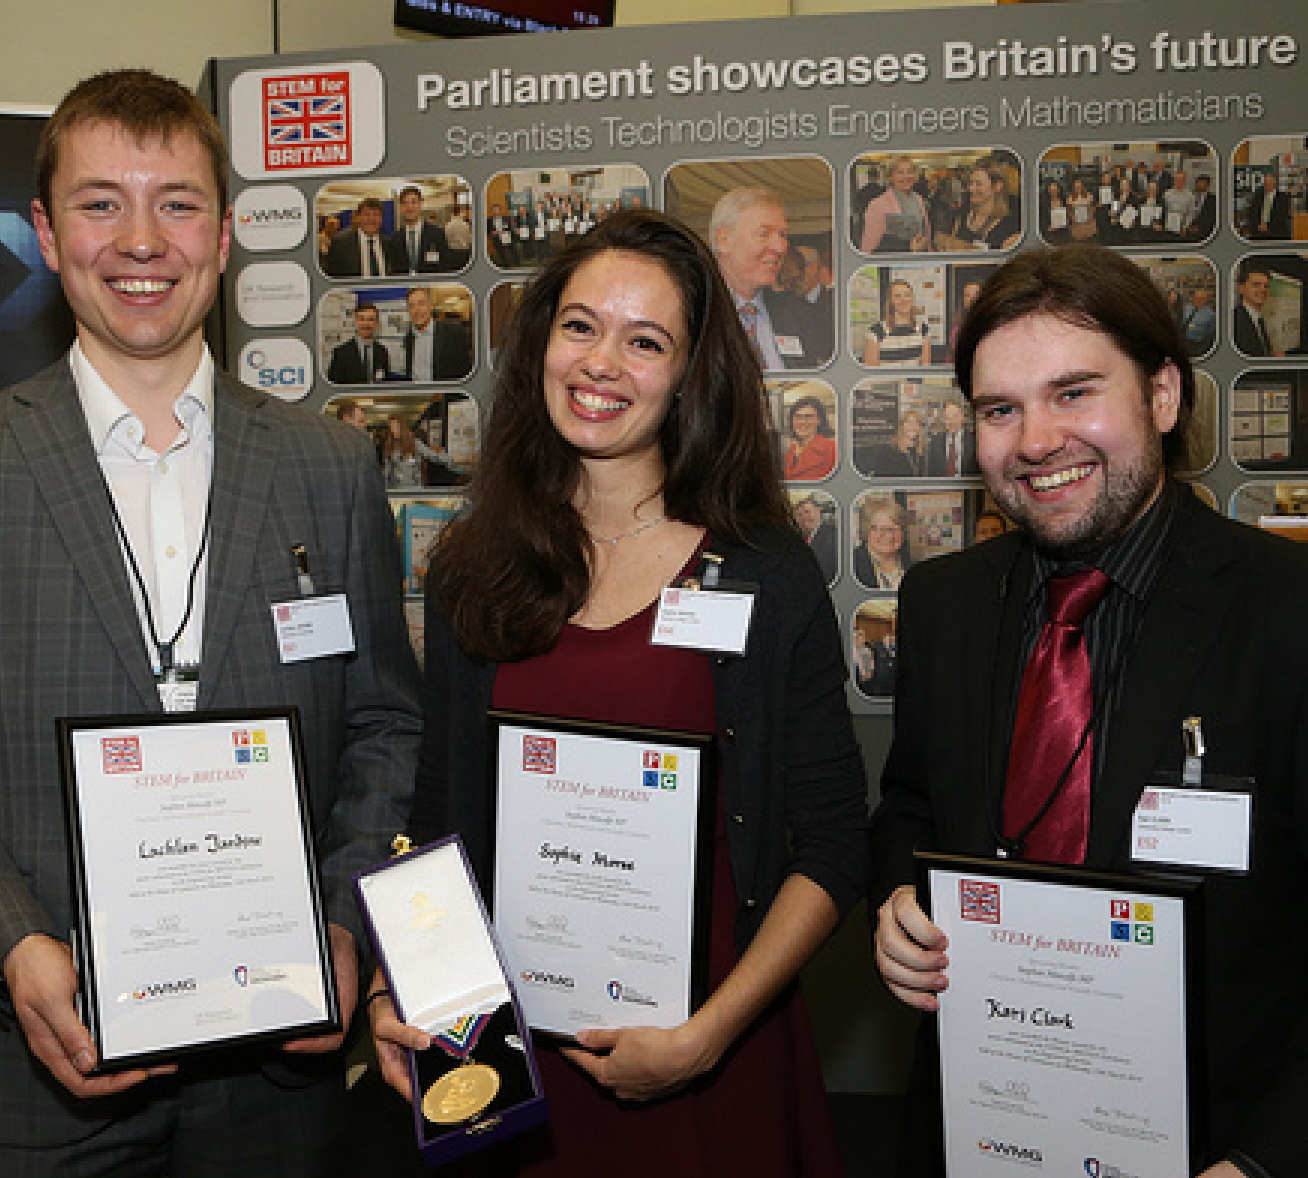 Smiley photo of the three competition winners 